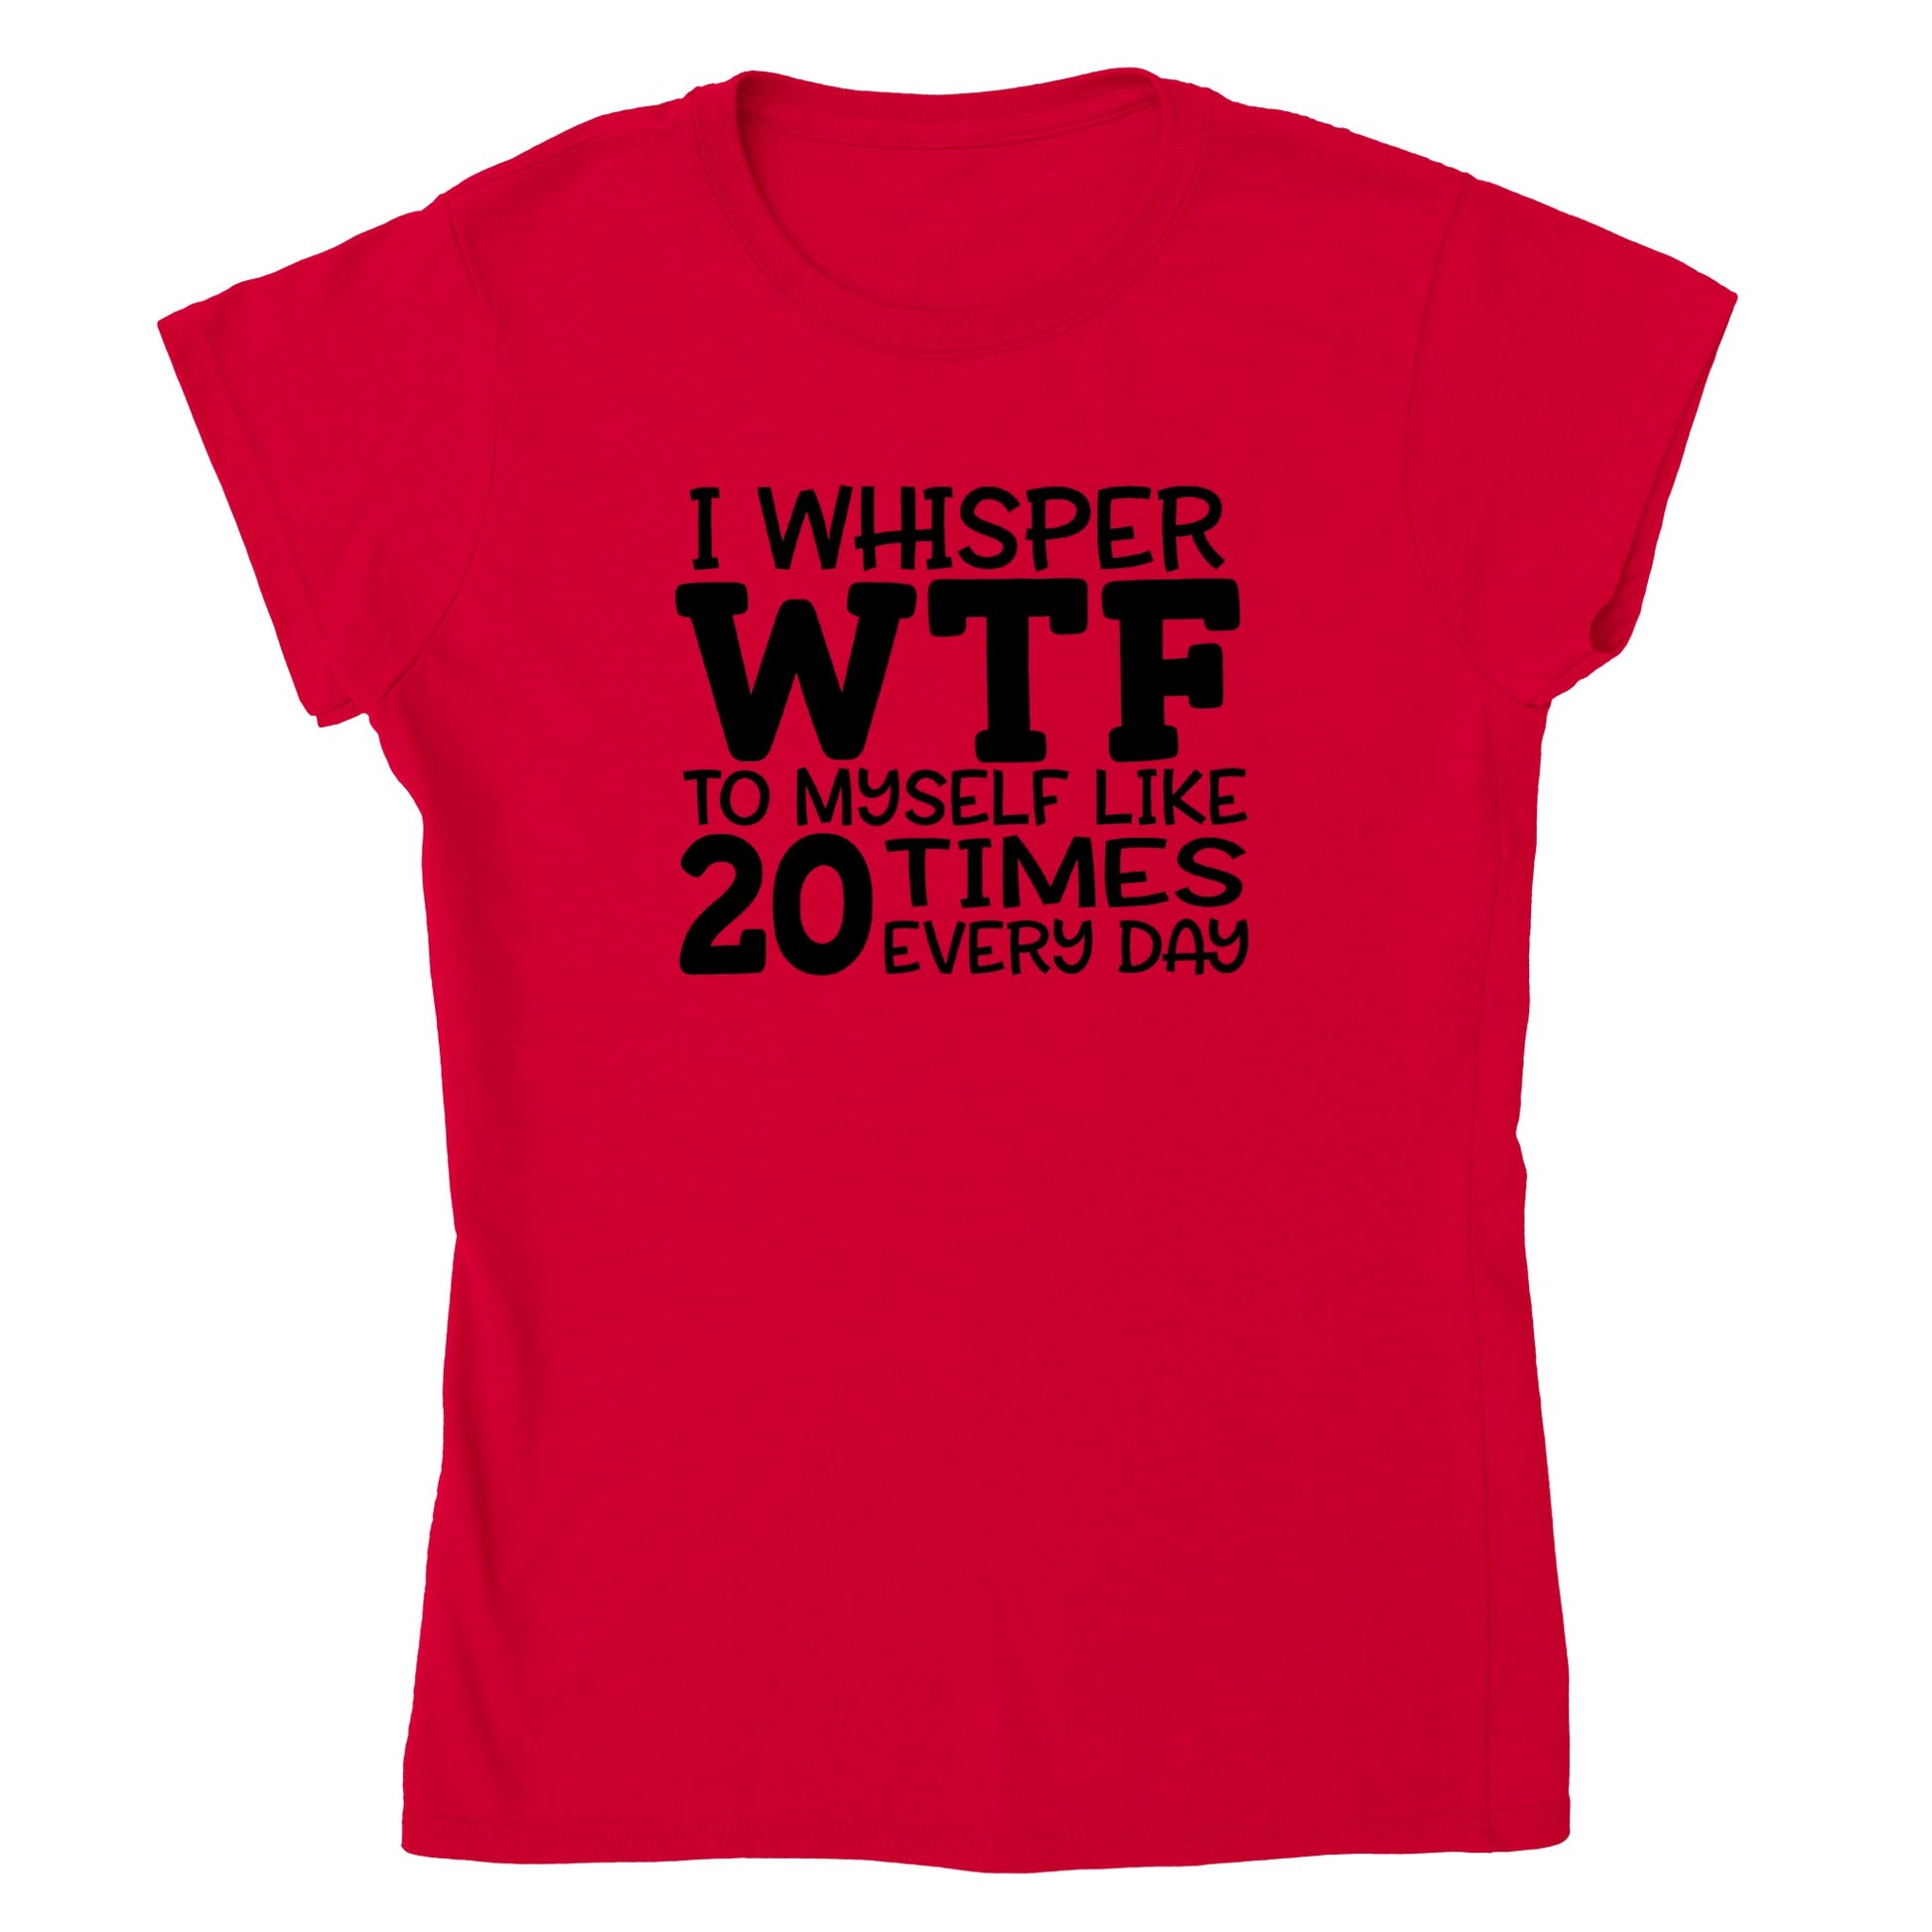 I Whisper WTF to Myself Like 20 Times Every Day - Womens Crewneck T-shirt - Mister Snarky's